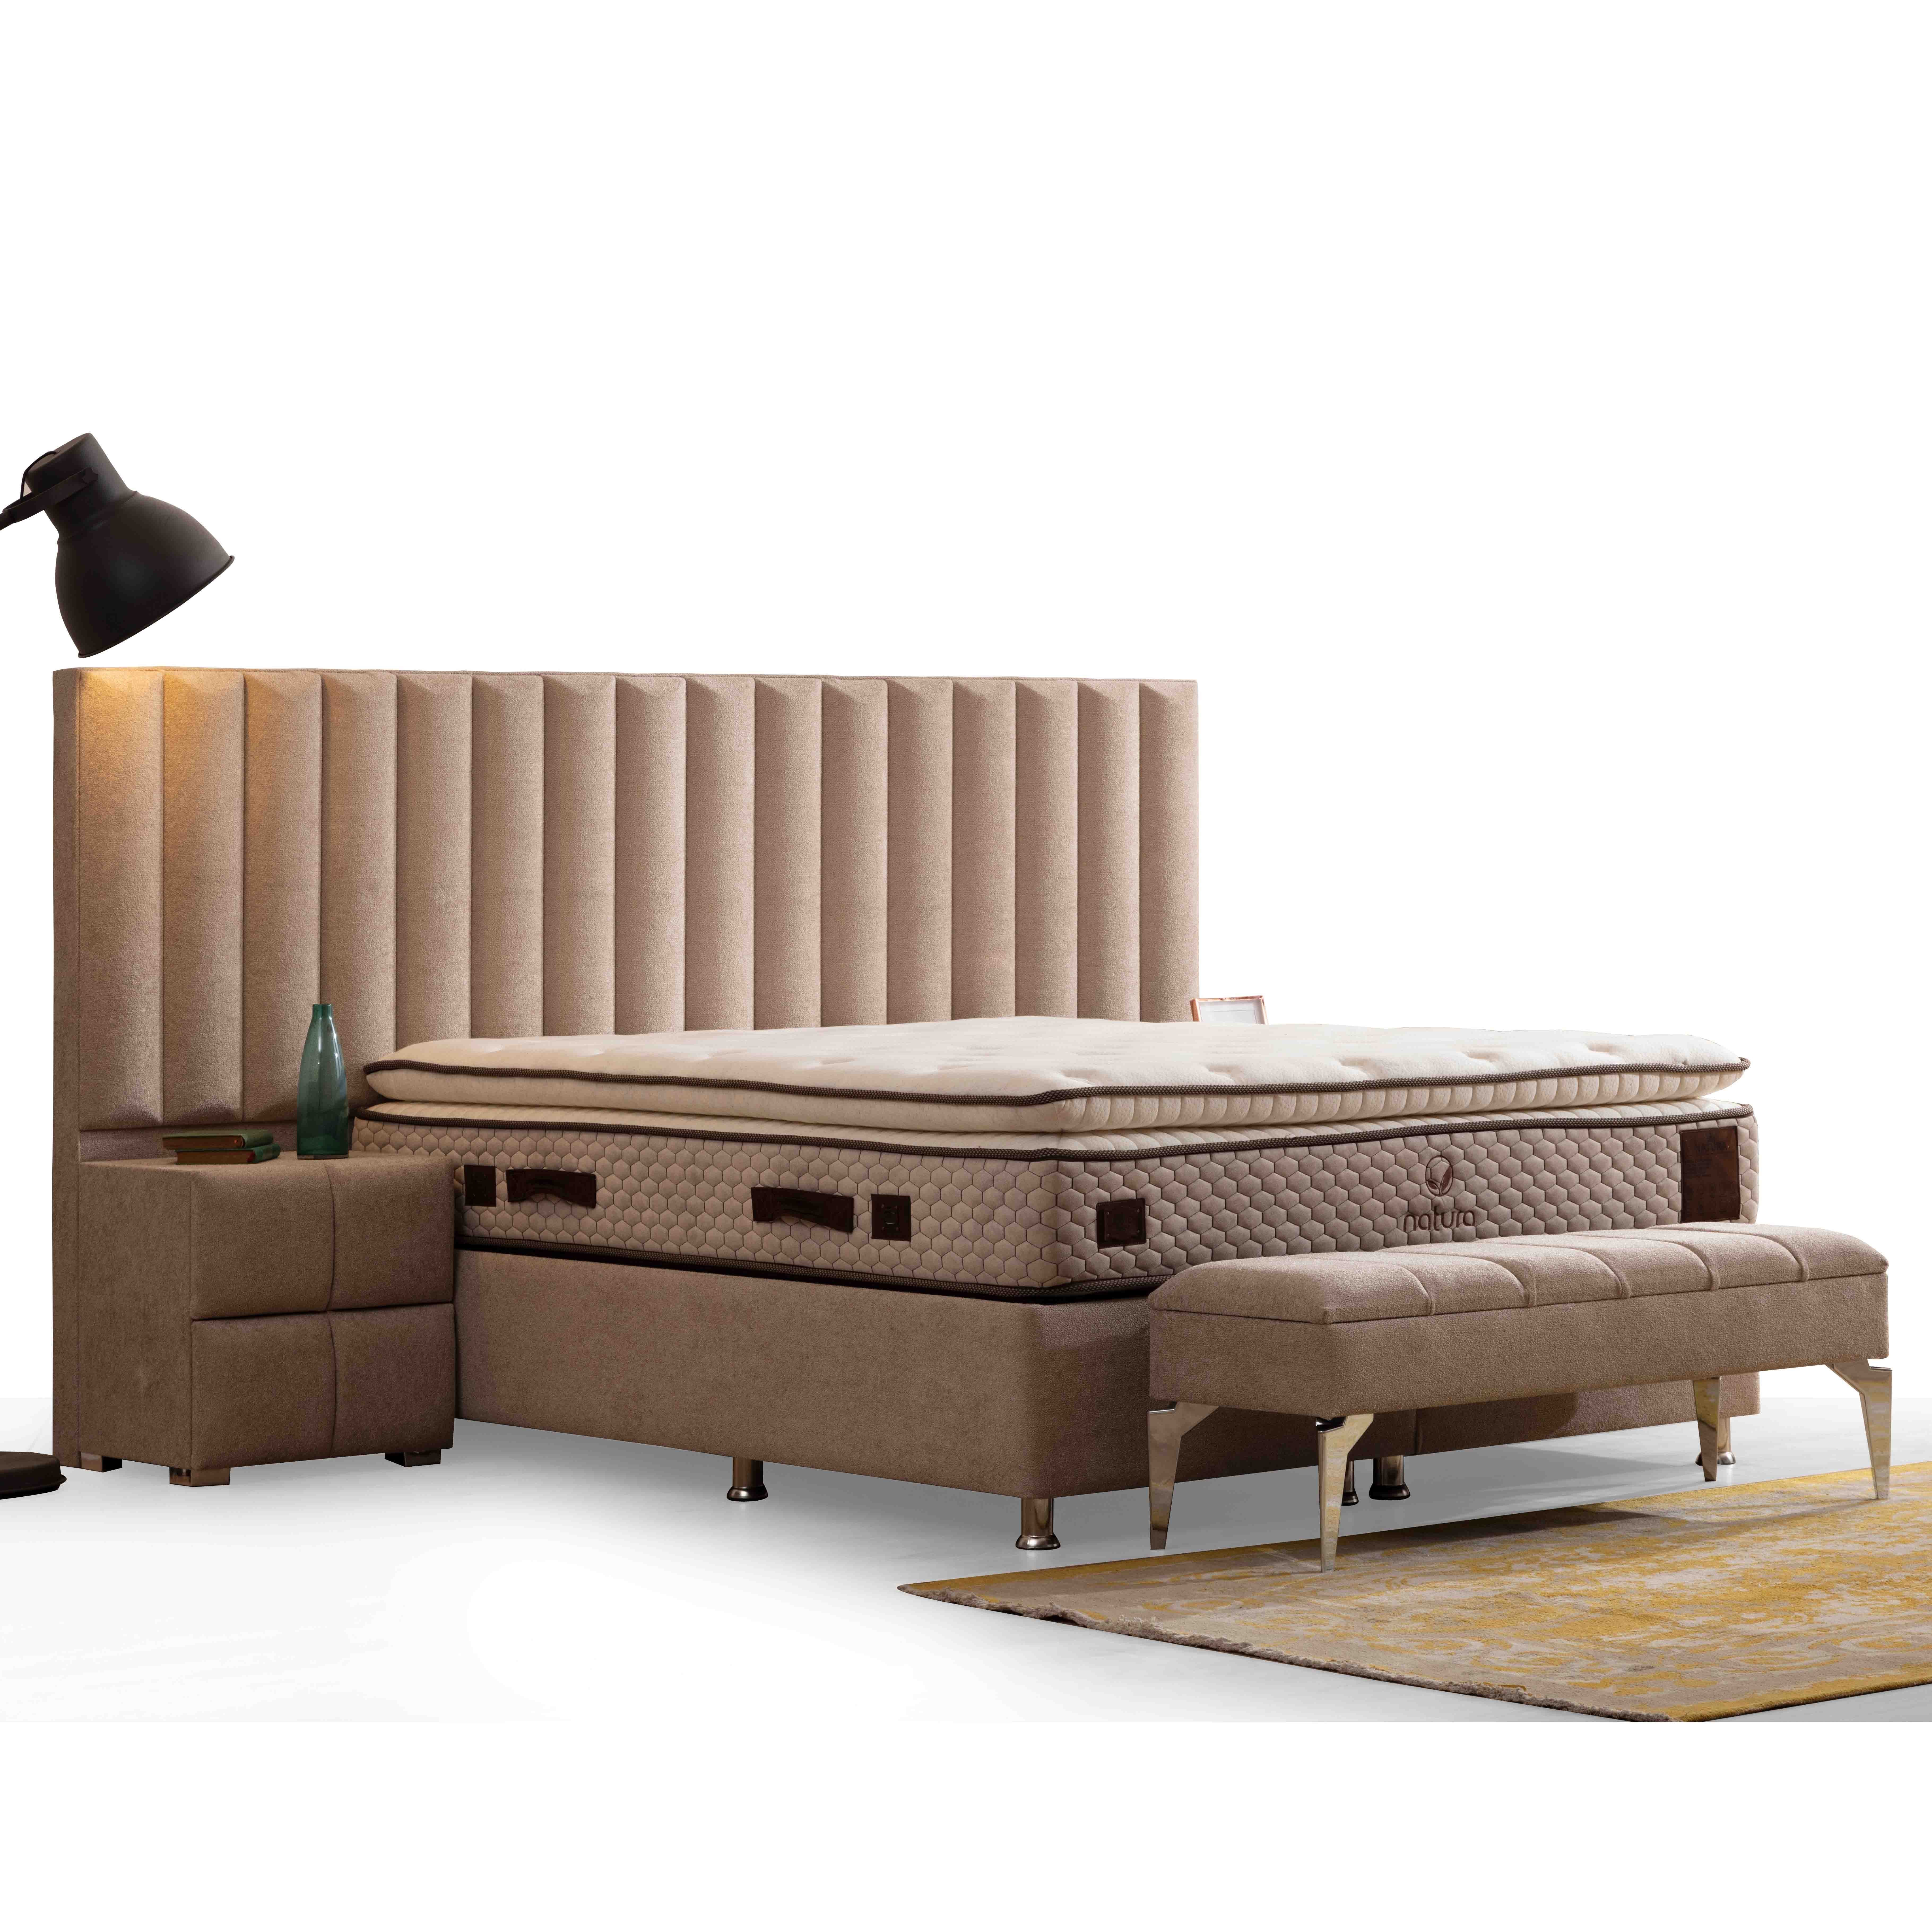 Dream Bed With Storage 120*200